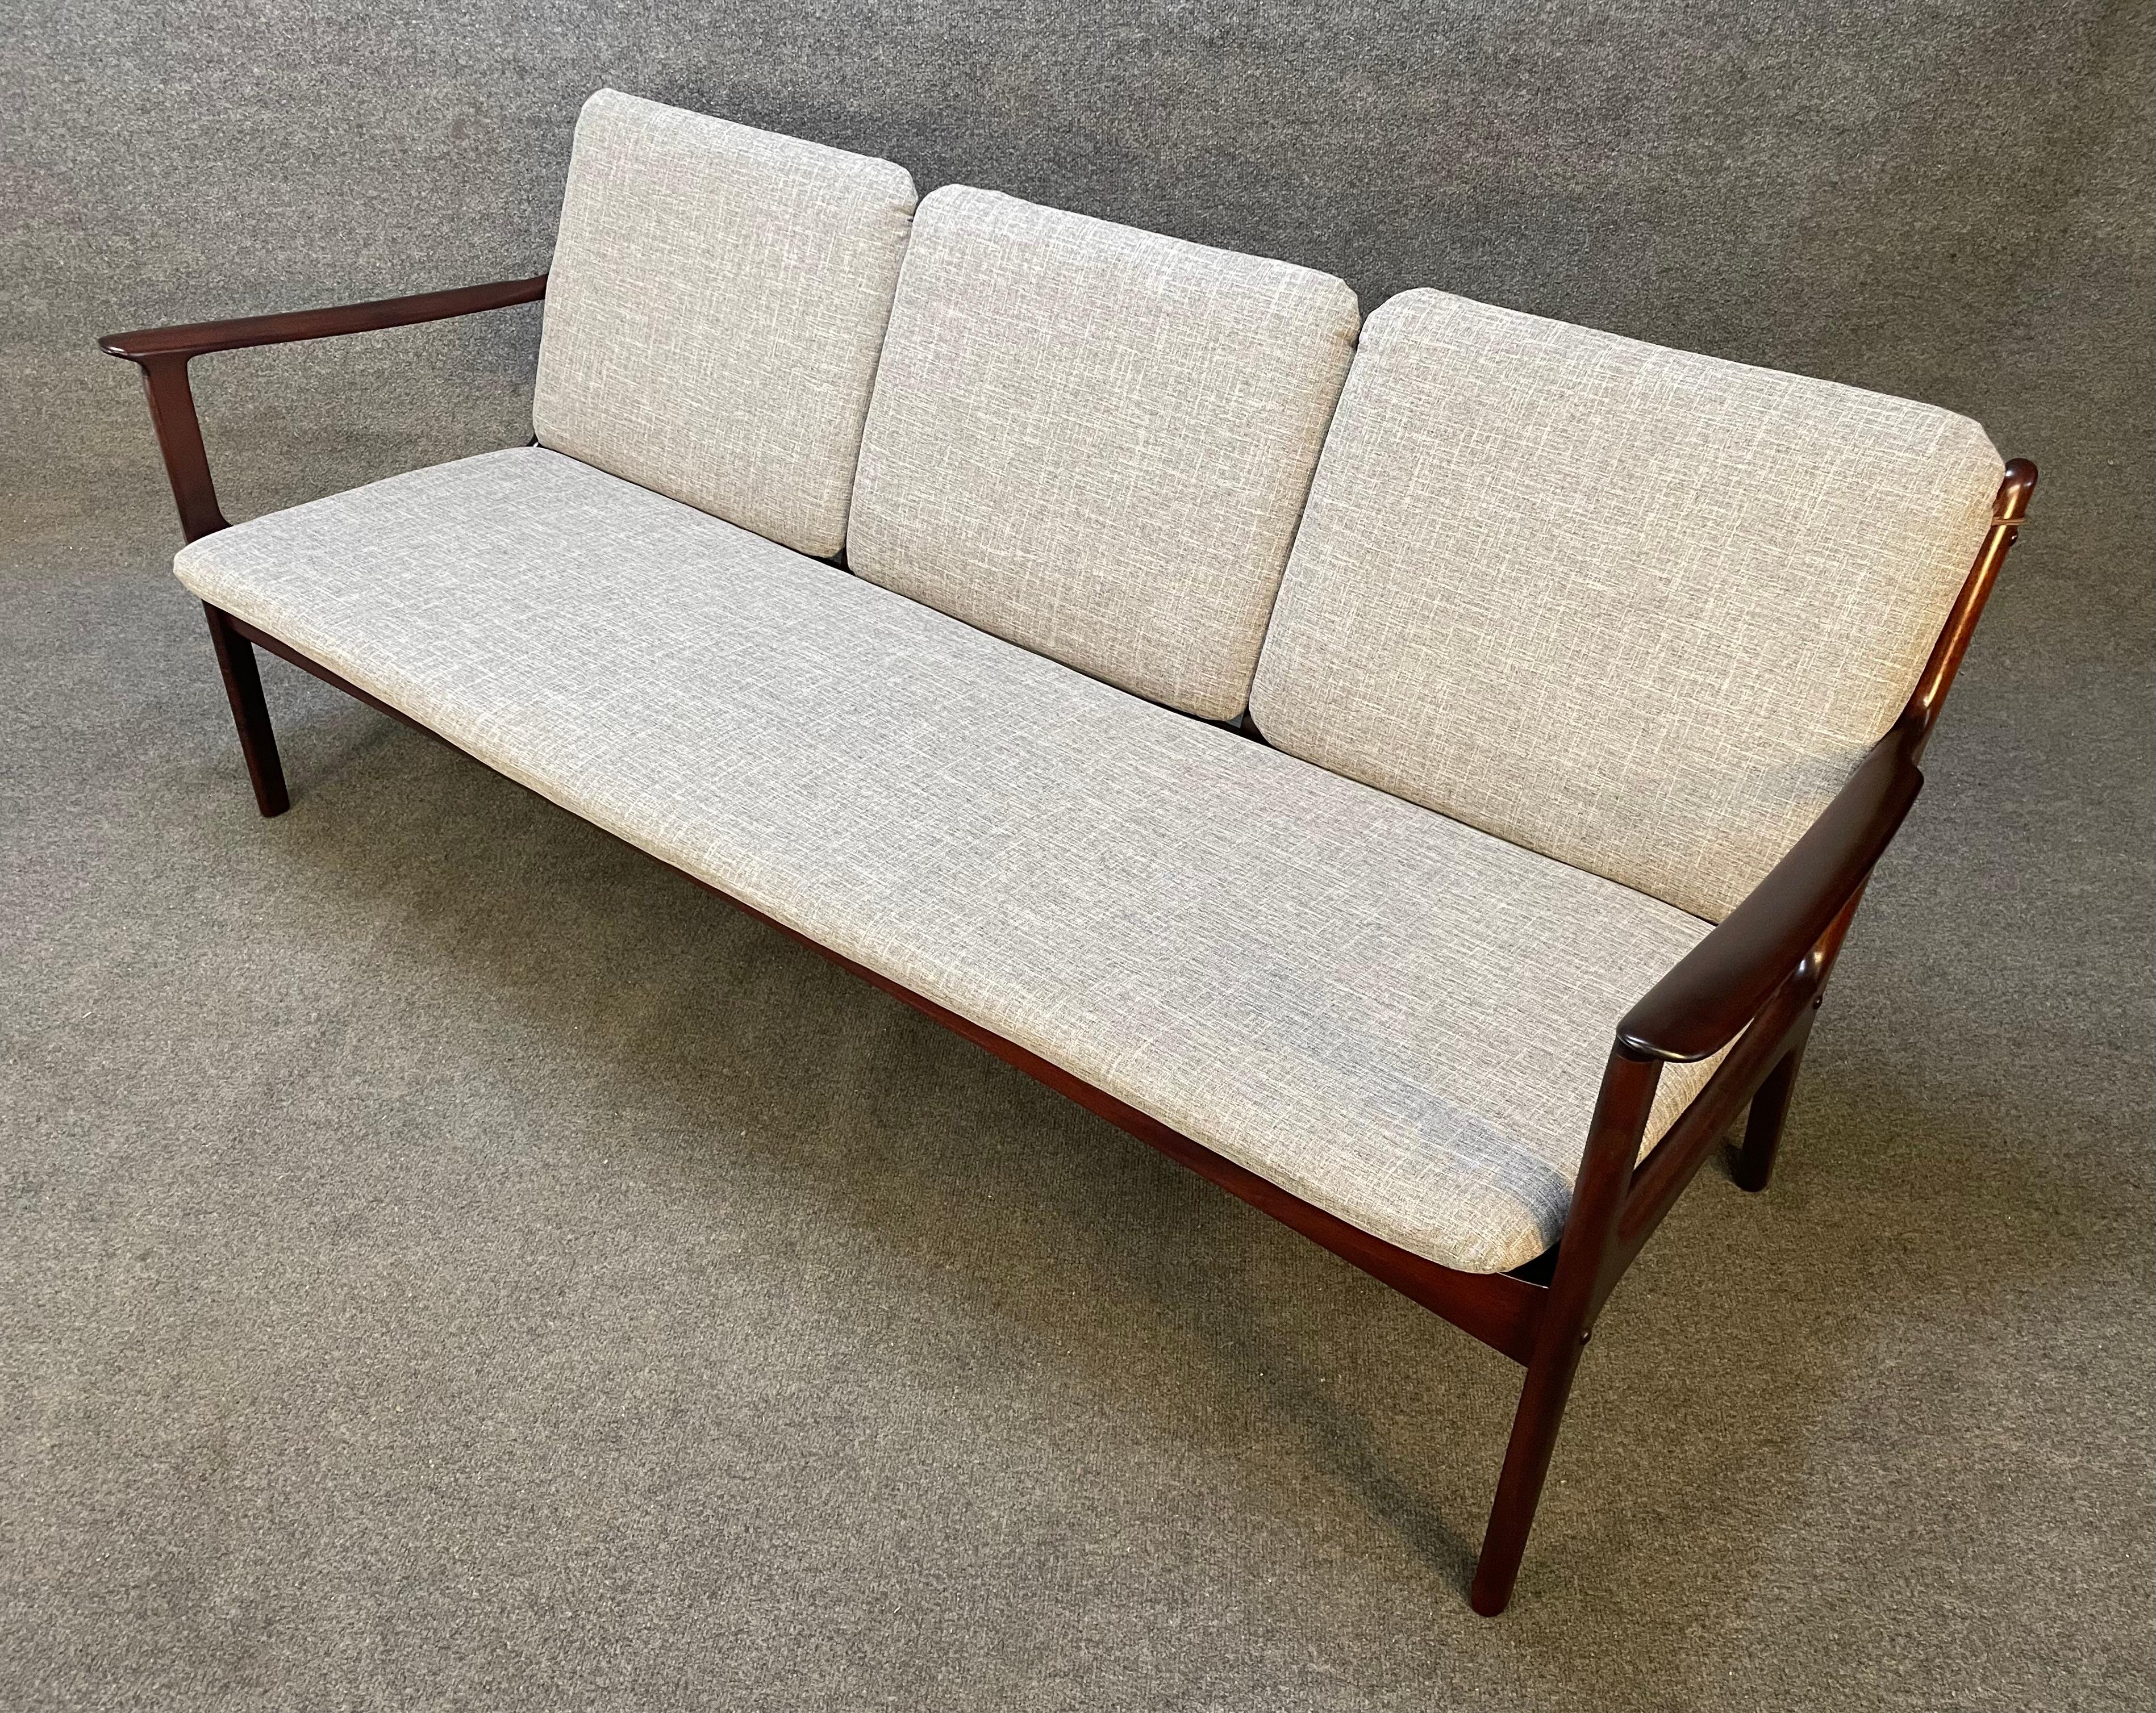 Woodwork Vintage Danish Mid Century Mahogany Sofa by Ole Wanscher for Poul Jeppesen For Sale